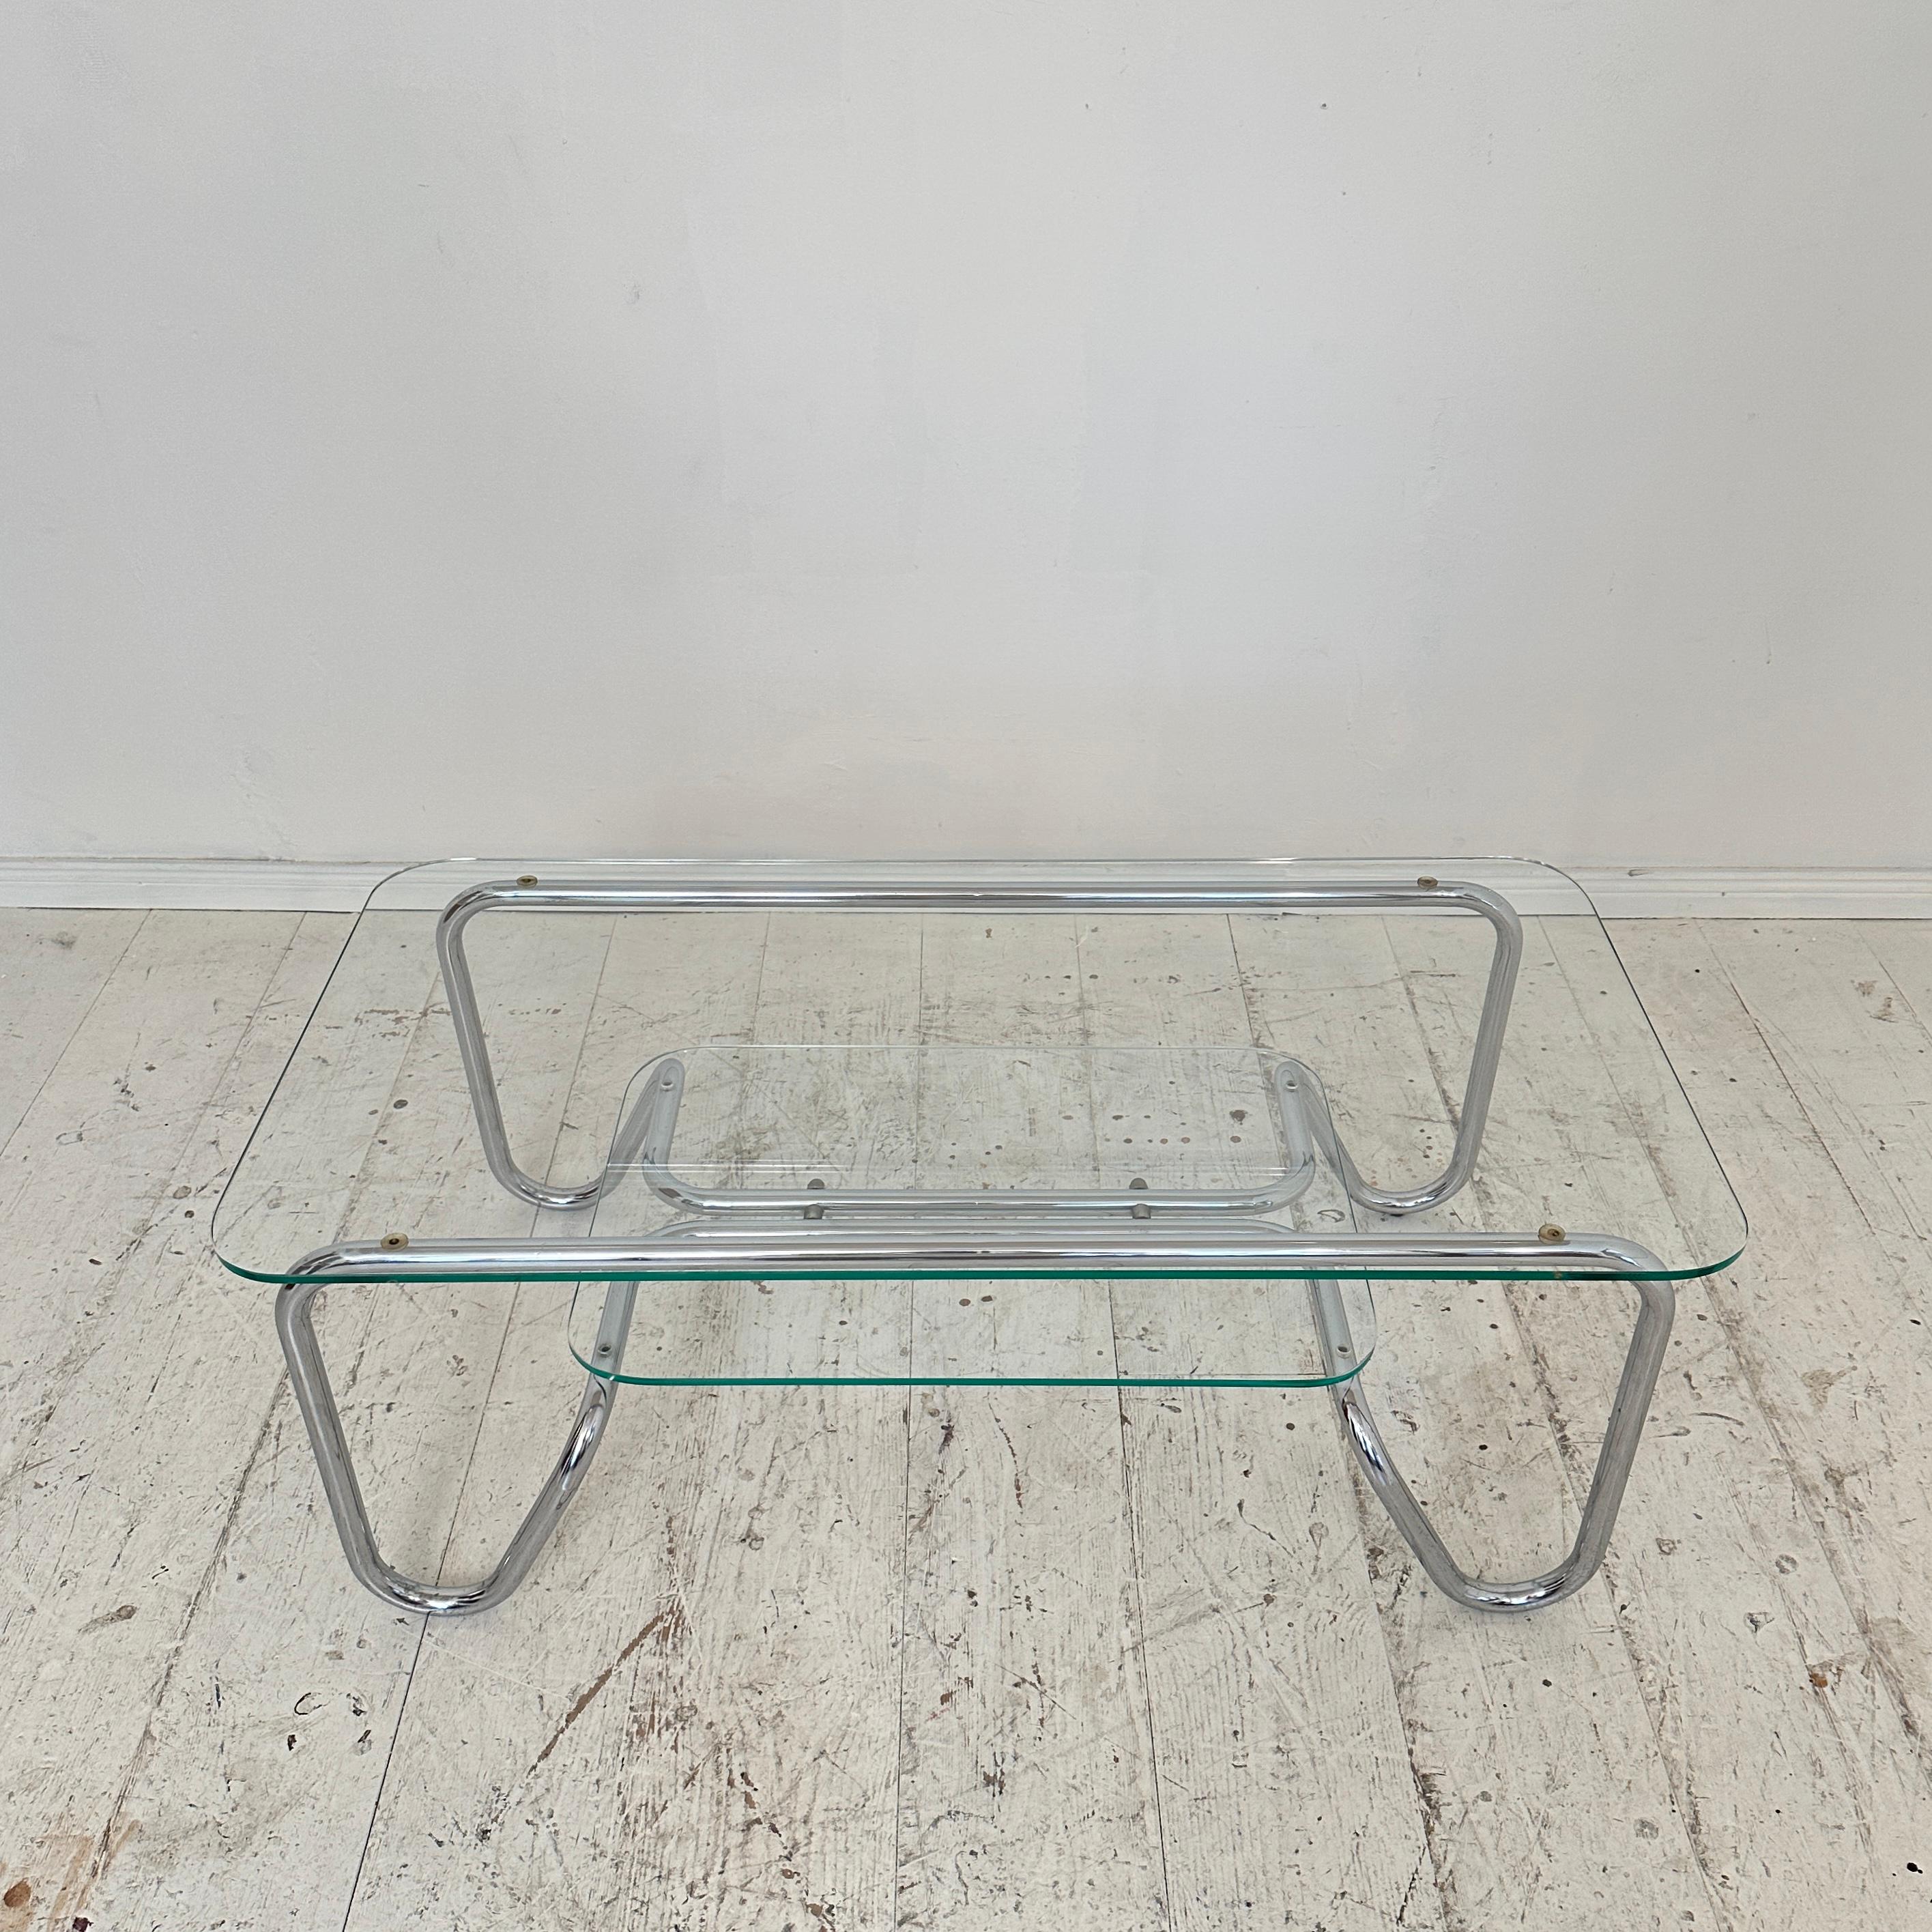 Late 20th Century Mid Century Italian Chrome Coffee Table with Glass Top Bauhaus Style, 1970 For Sale